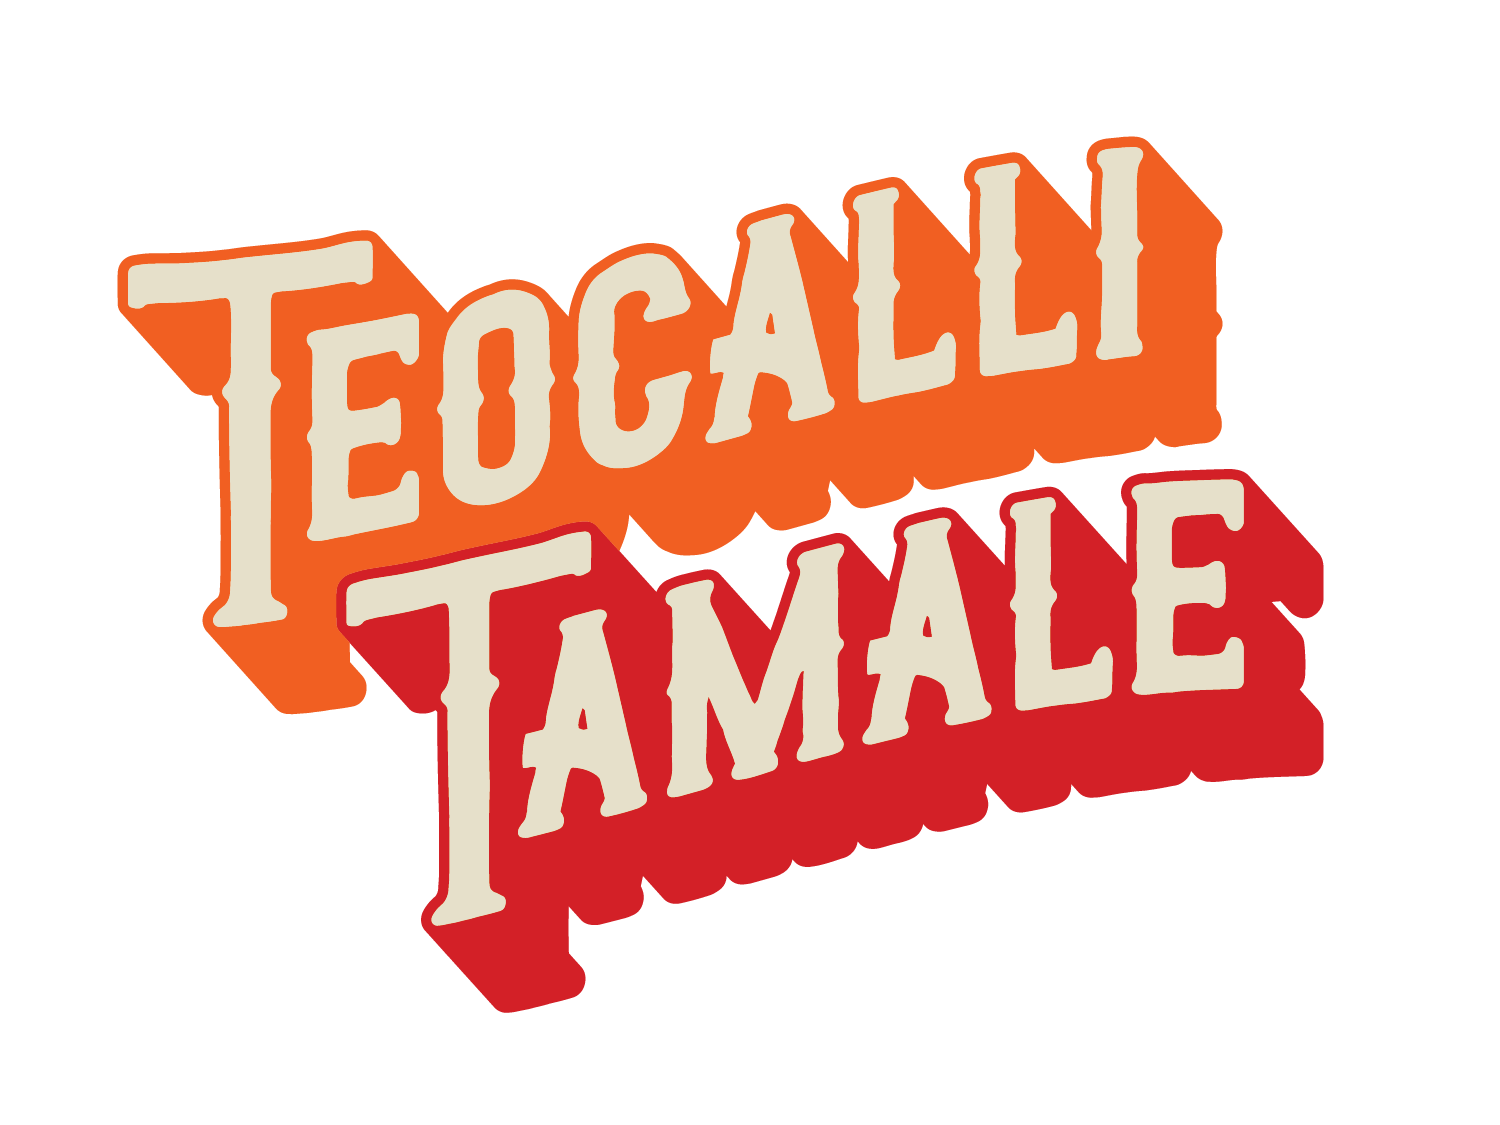 a logo that says teocalli tamale on it